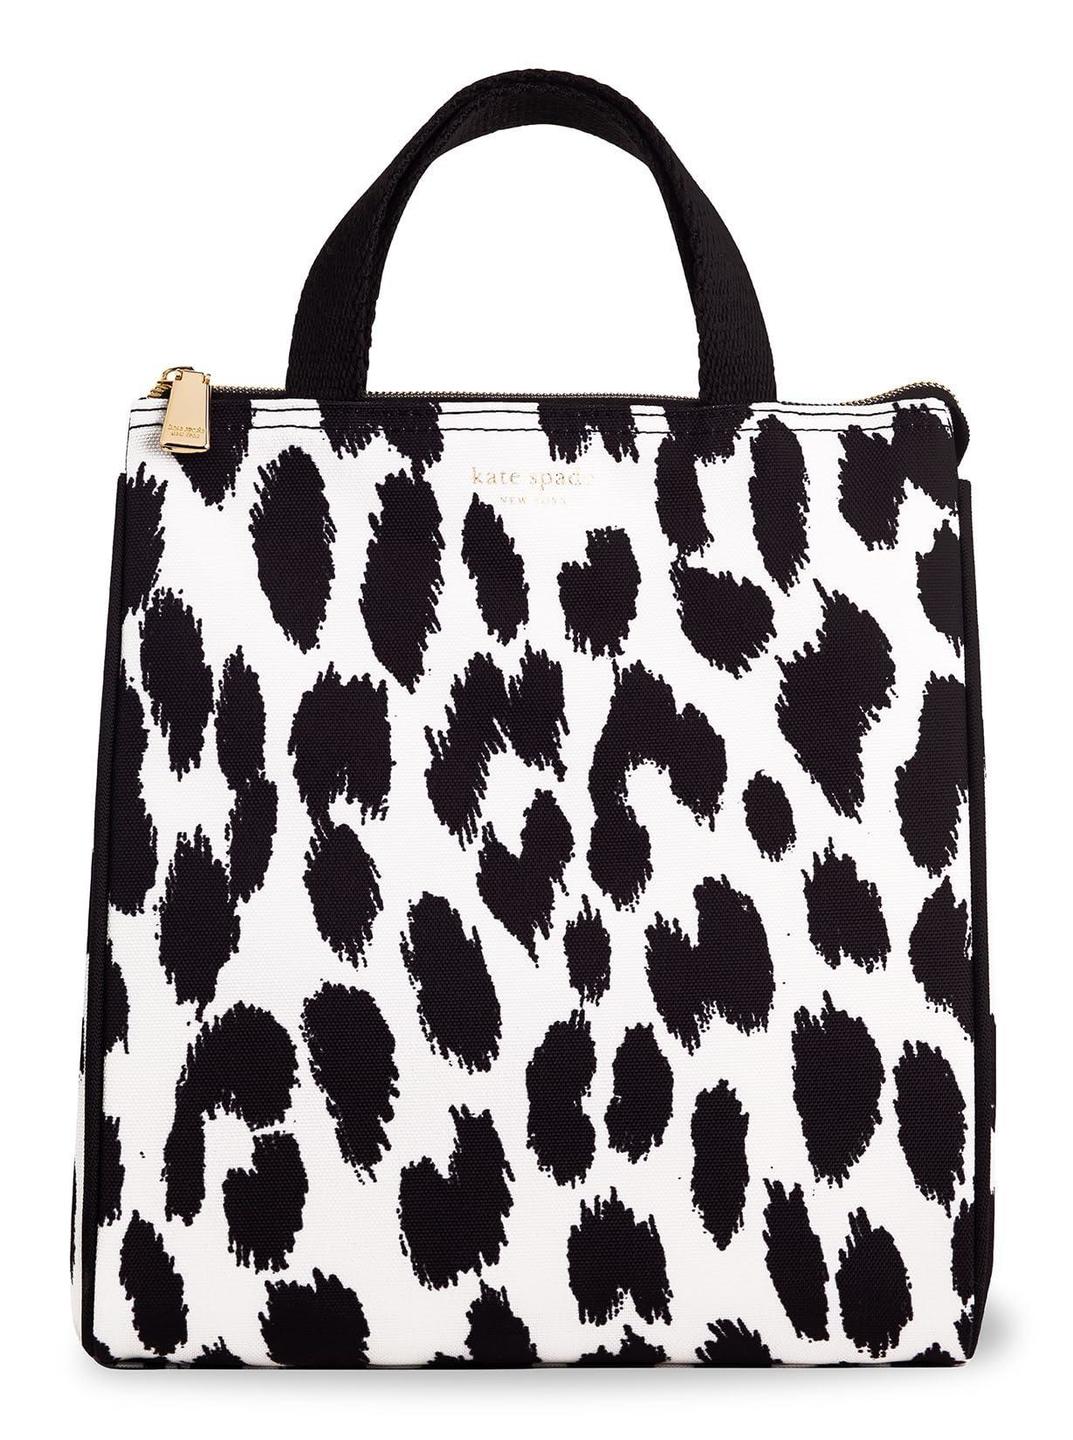 New York Cute Lunch Bag for Women, Large Capacity Lunch Tote